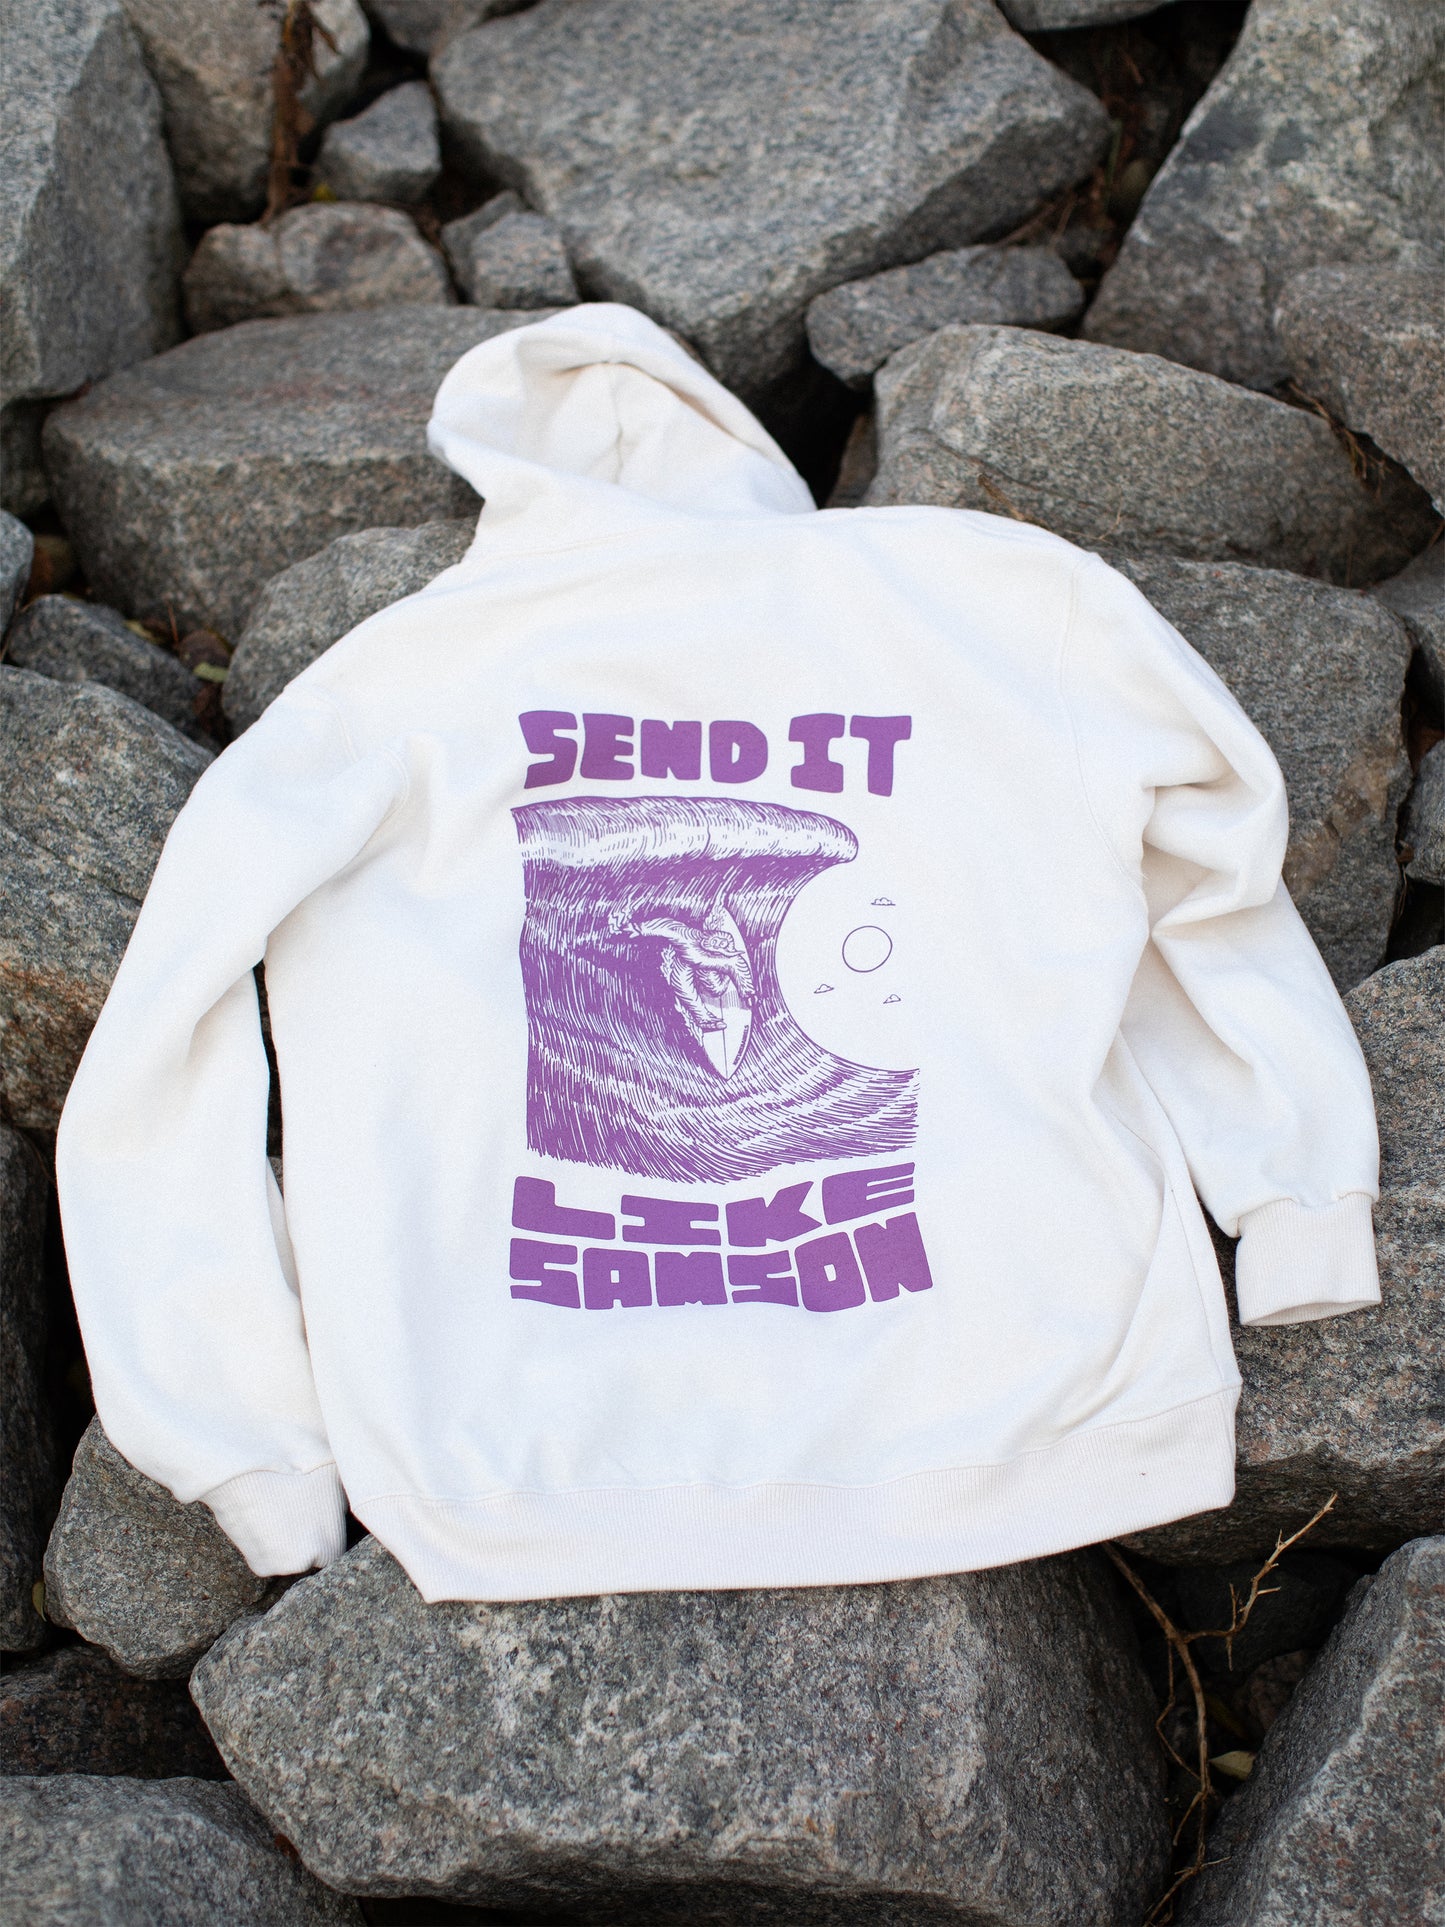 White hoodie with large purple graphic in the back featuring 'SEND IT LIKE SAMSON' text and an illustration of a sasquatch riding a large wave, laid on a rocky surface.